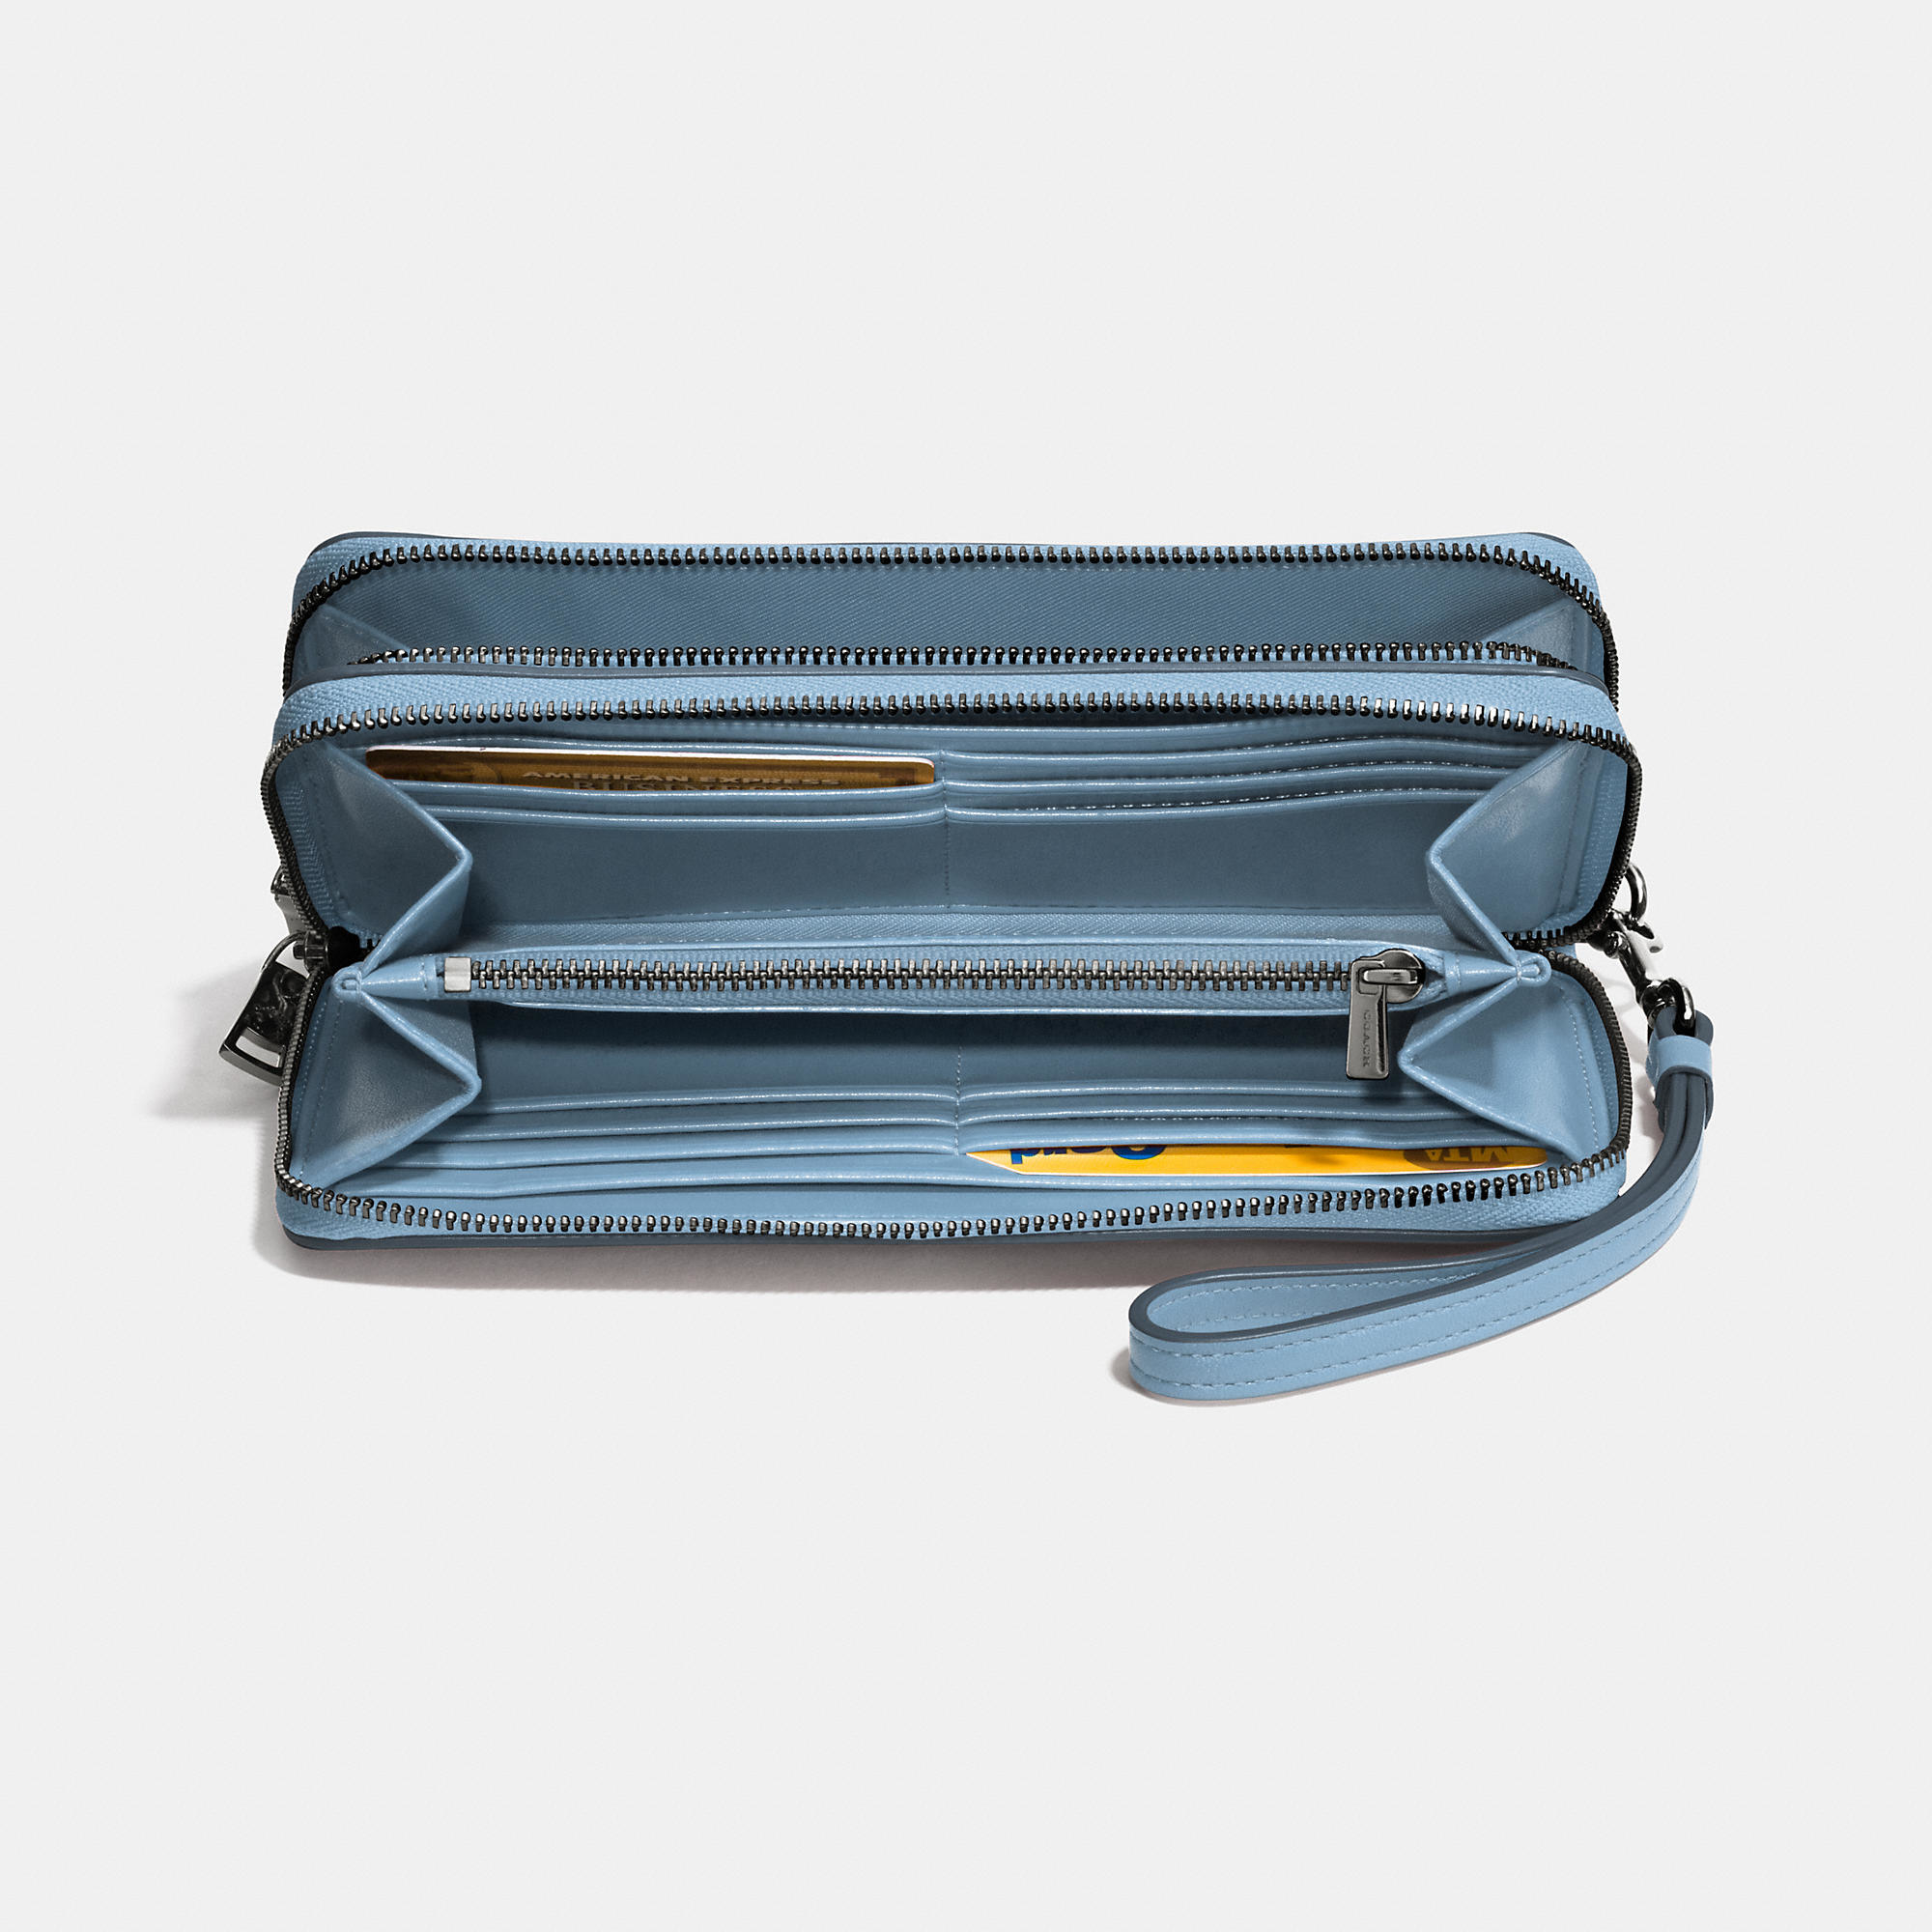 Lyst - Coach Double Accordion Zip Wallet In Smooth Leather in Blue